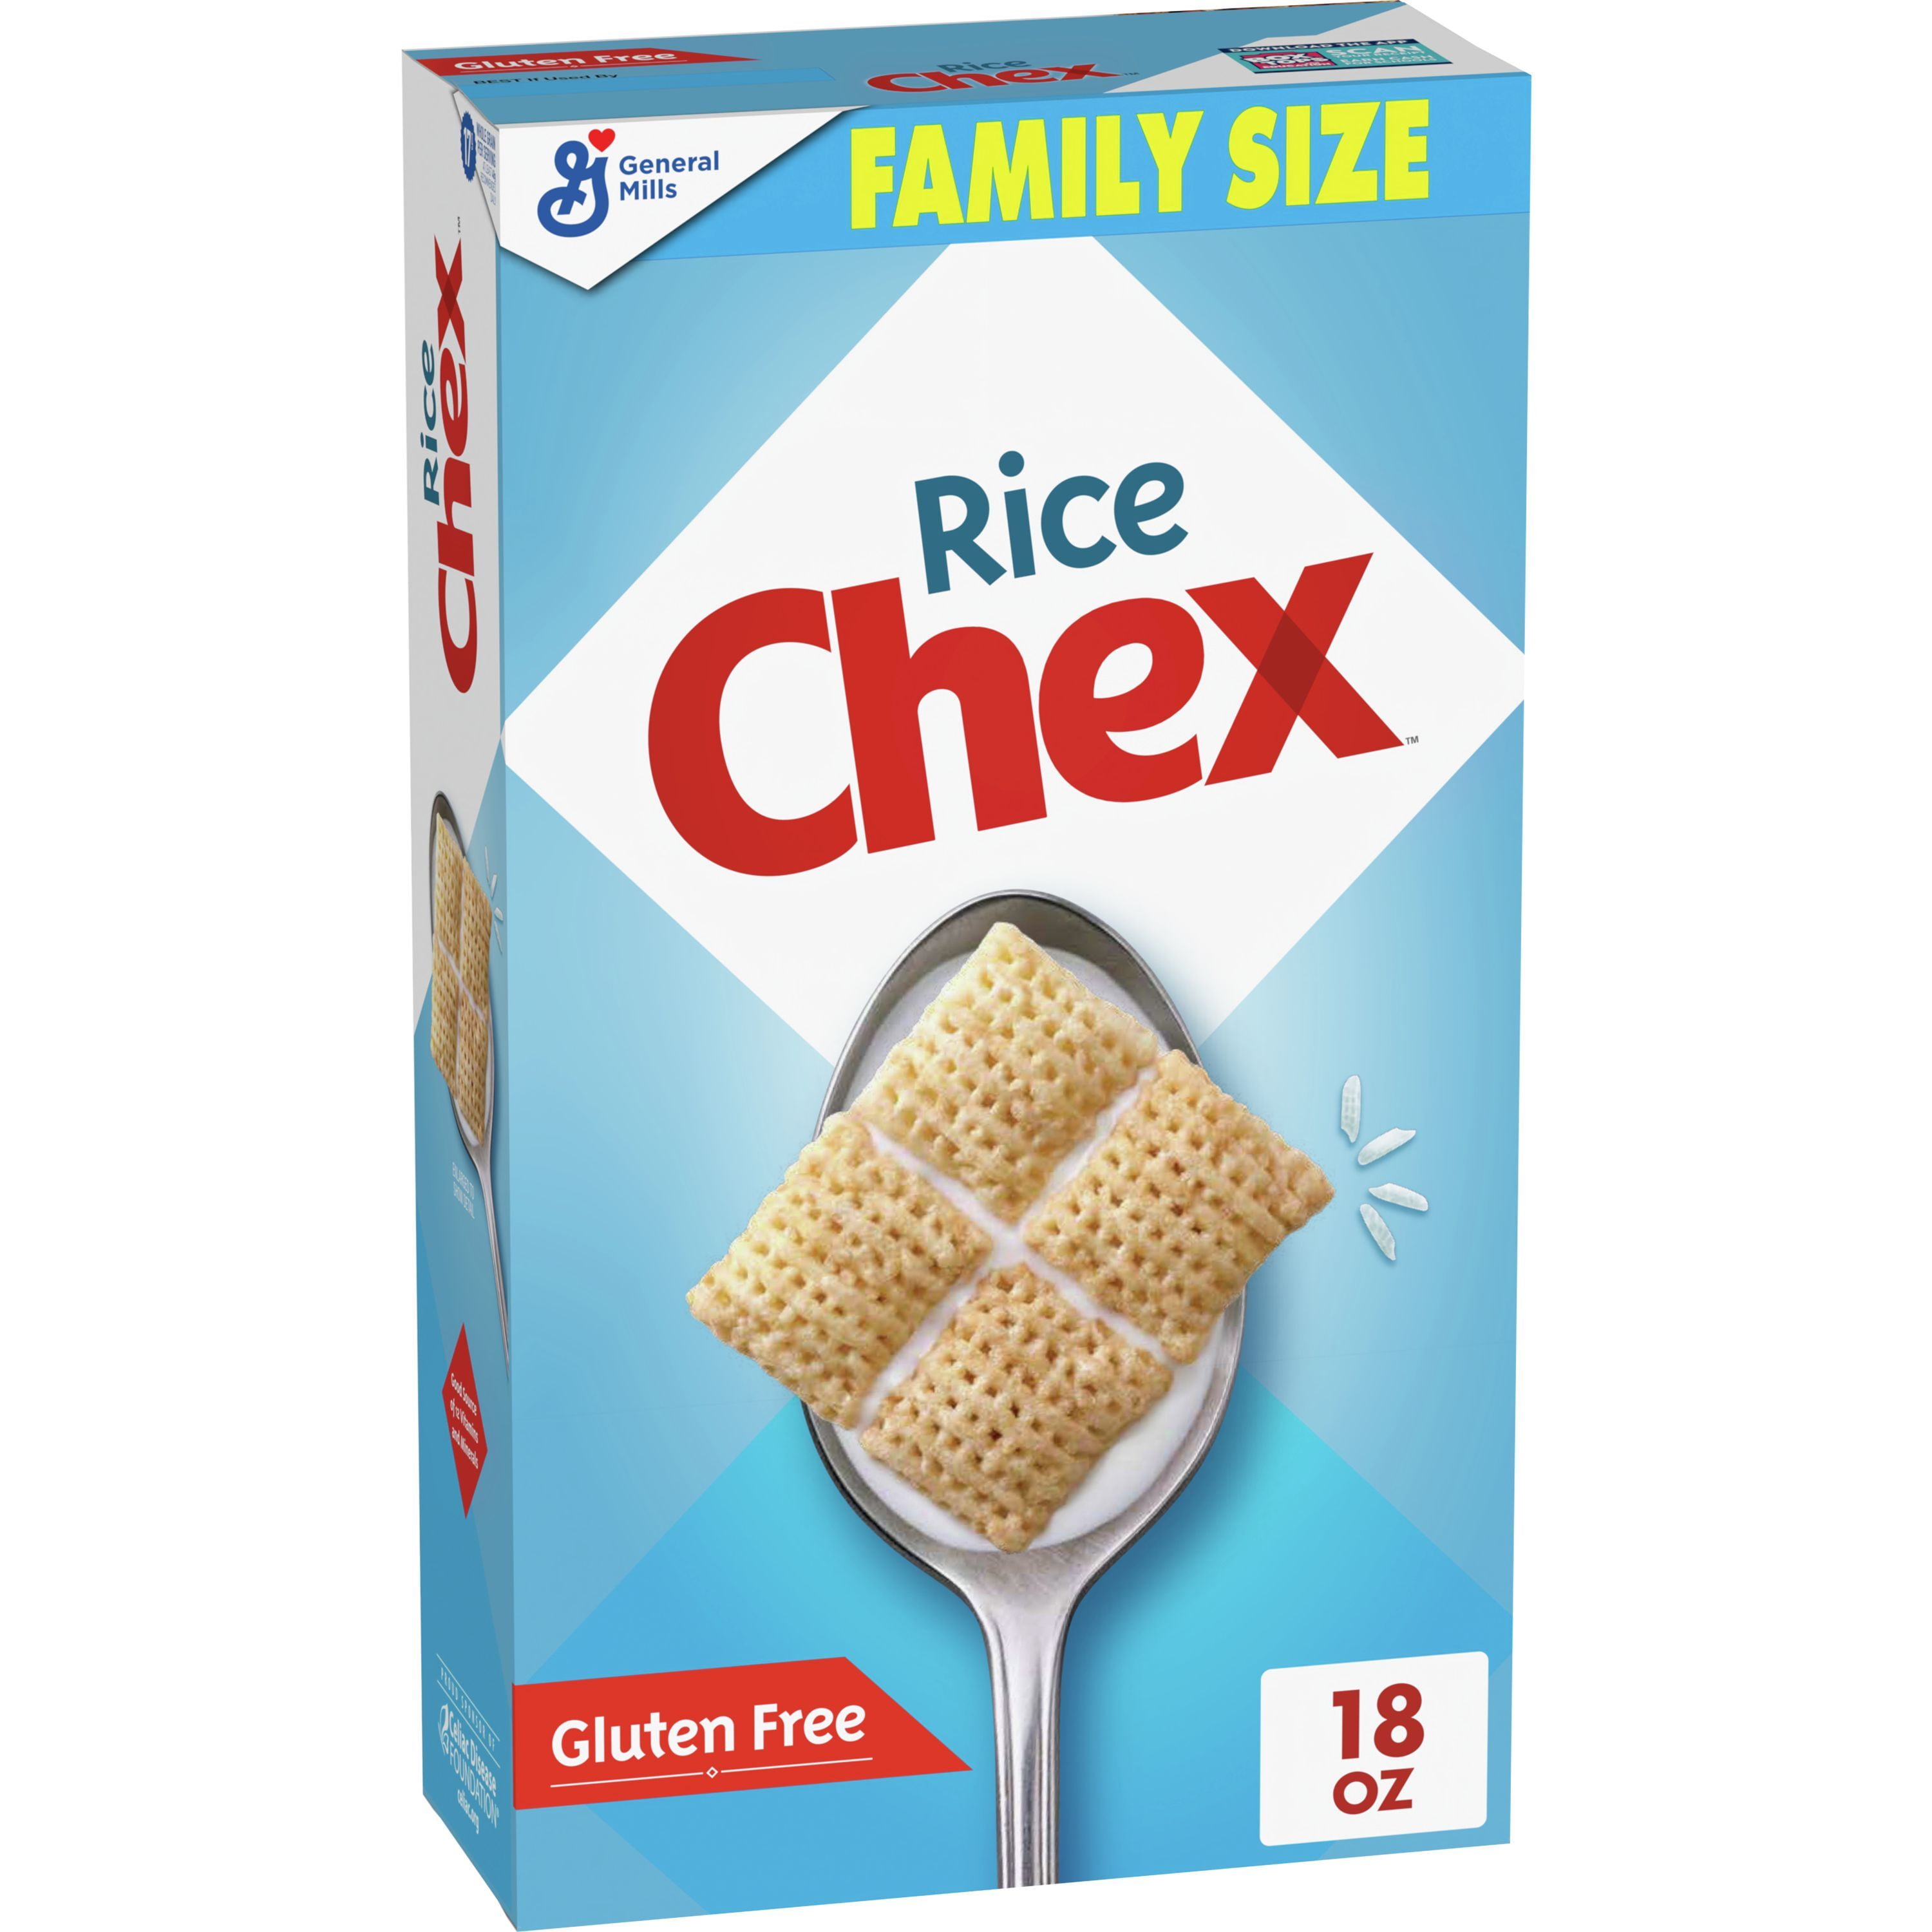 Rice Chex Cereal, Gluten Free Breakfast Cereal, Made with Whole Grain, Family Size, 18 OZ